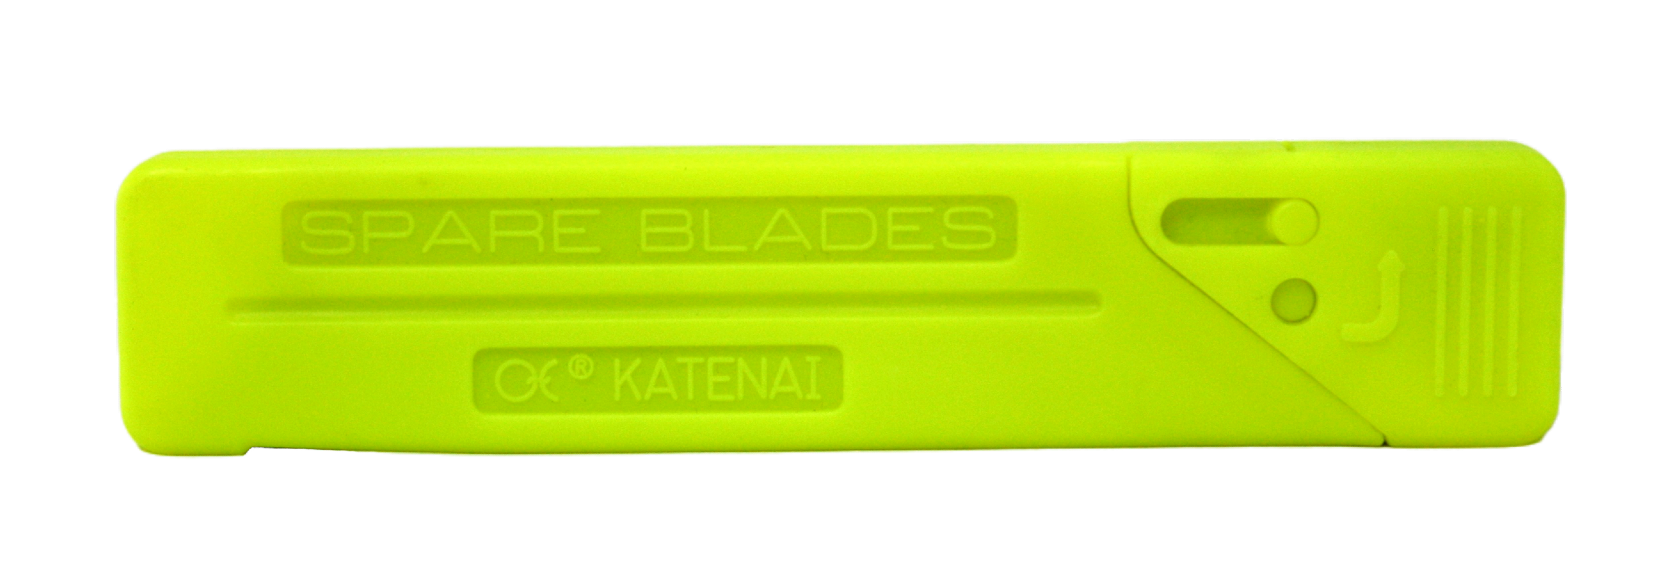 A pack of blades, lid closed